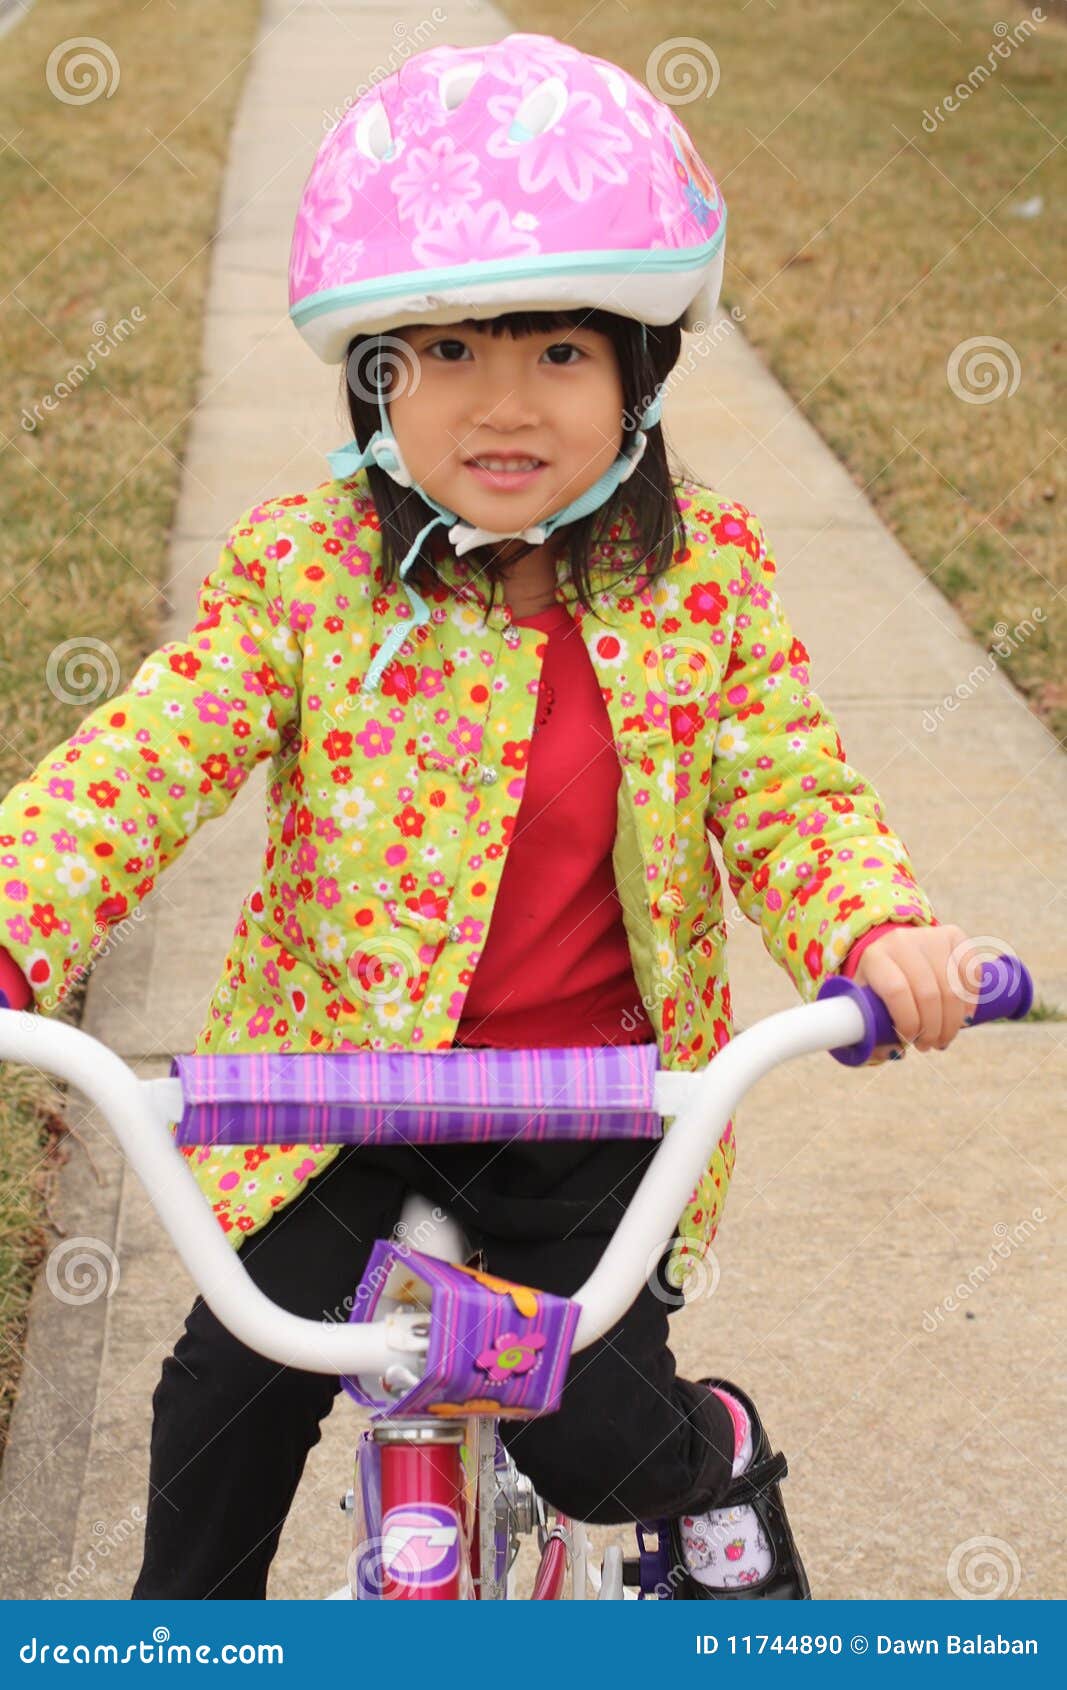 Asian Girl Riding On Bike With Helmet Stock Photo Image 1